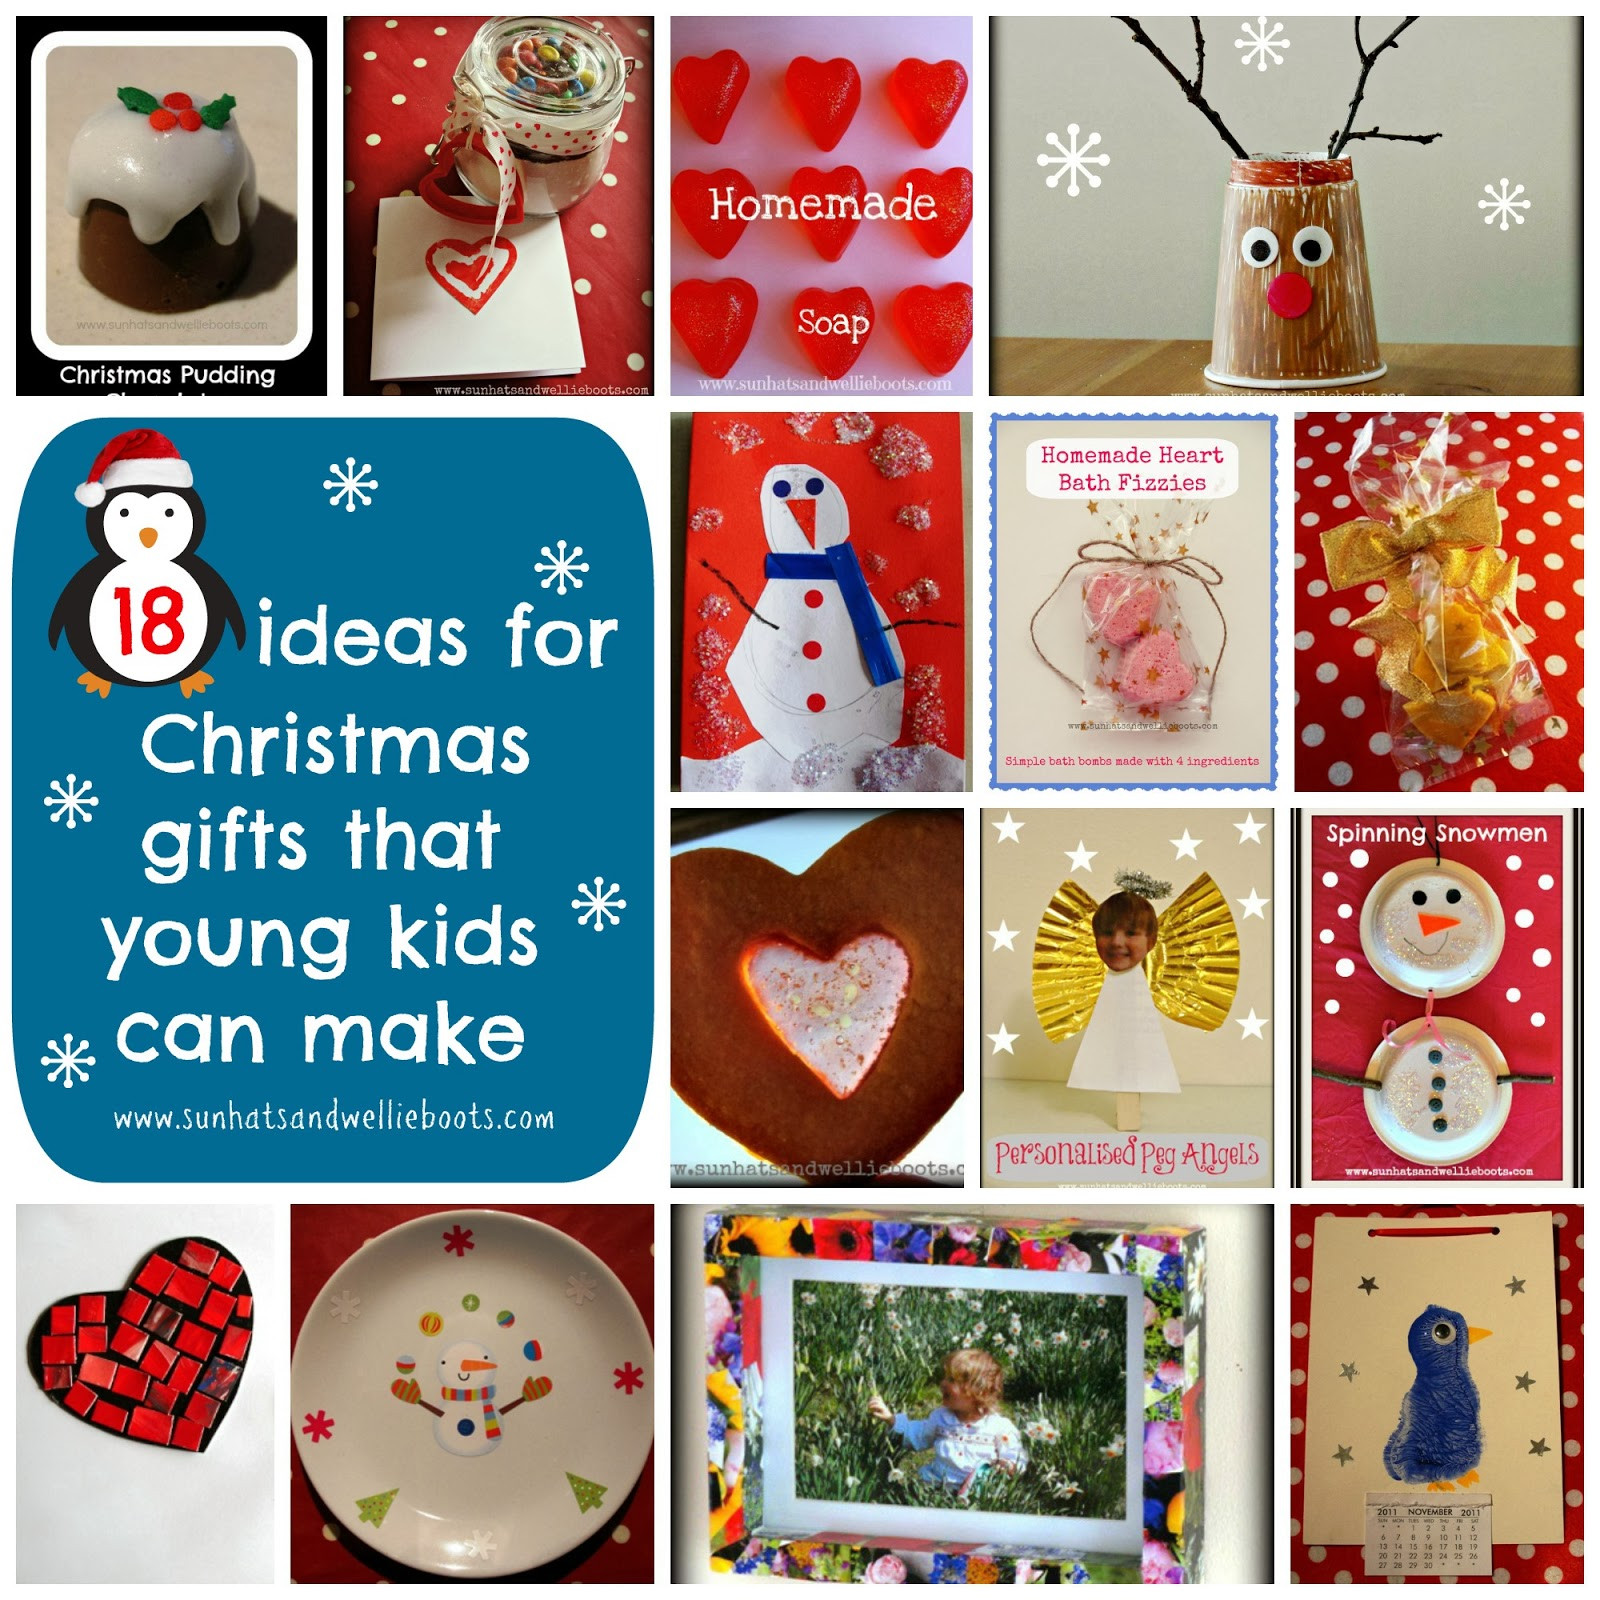 Christmas Gift Ideas For Kids To Make
 Sun Hats & Wellie Boots 18 Homemade Christmas Gifts That